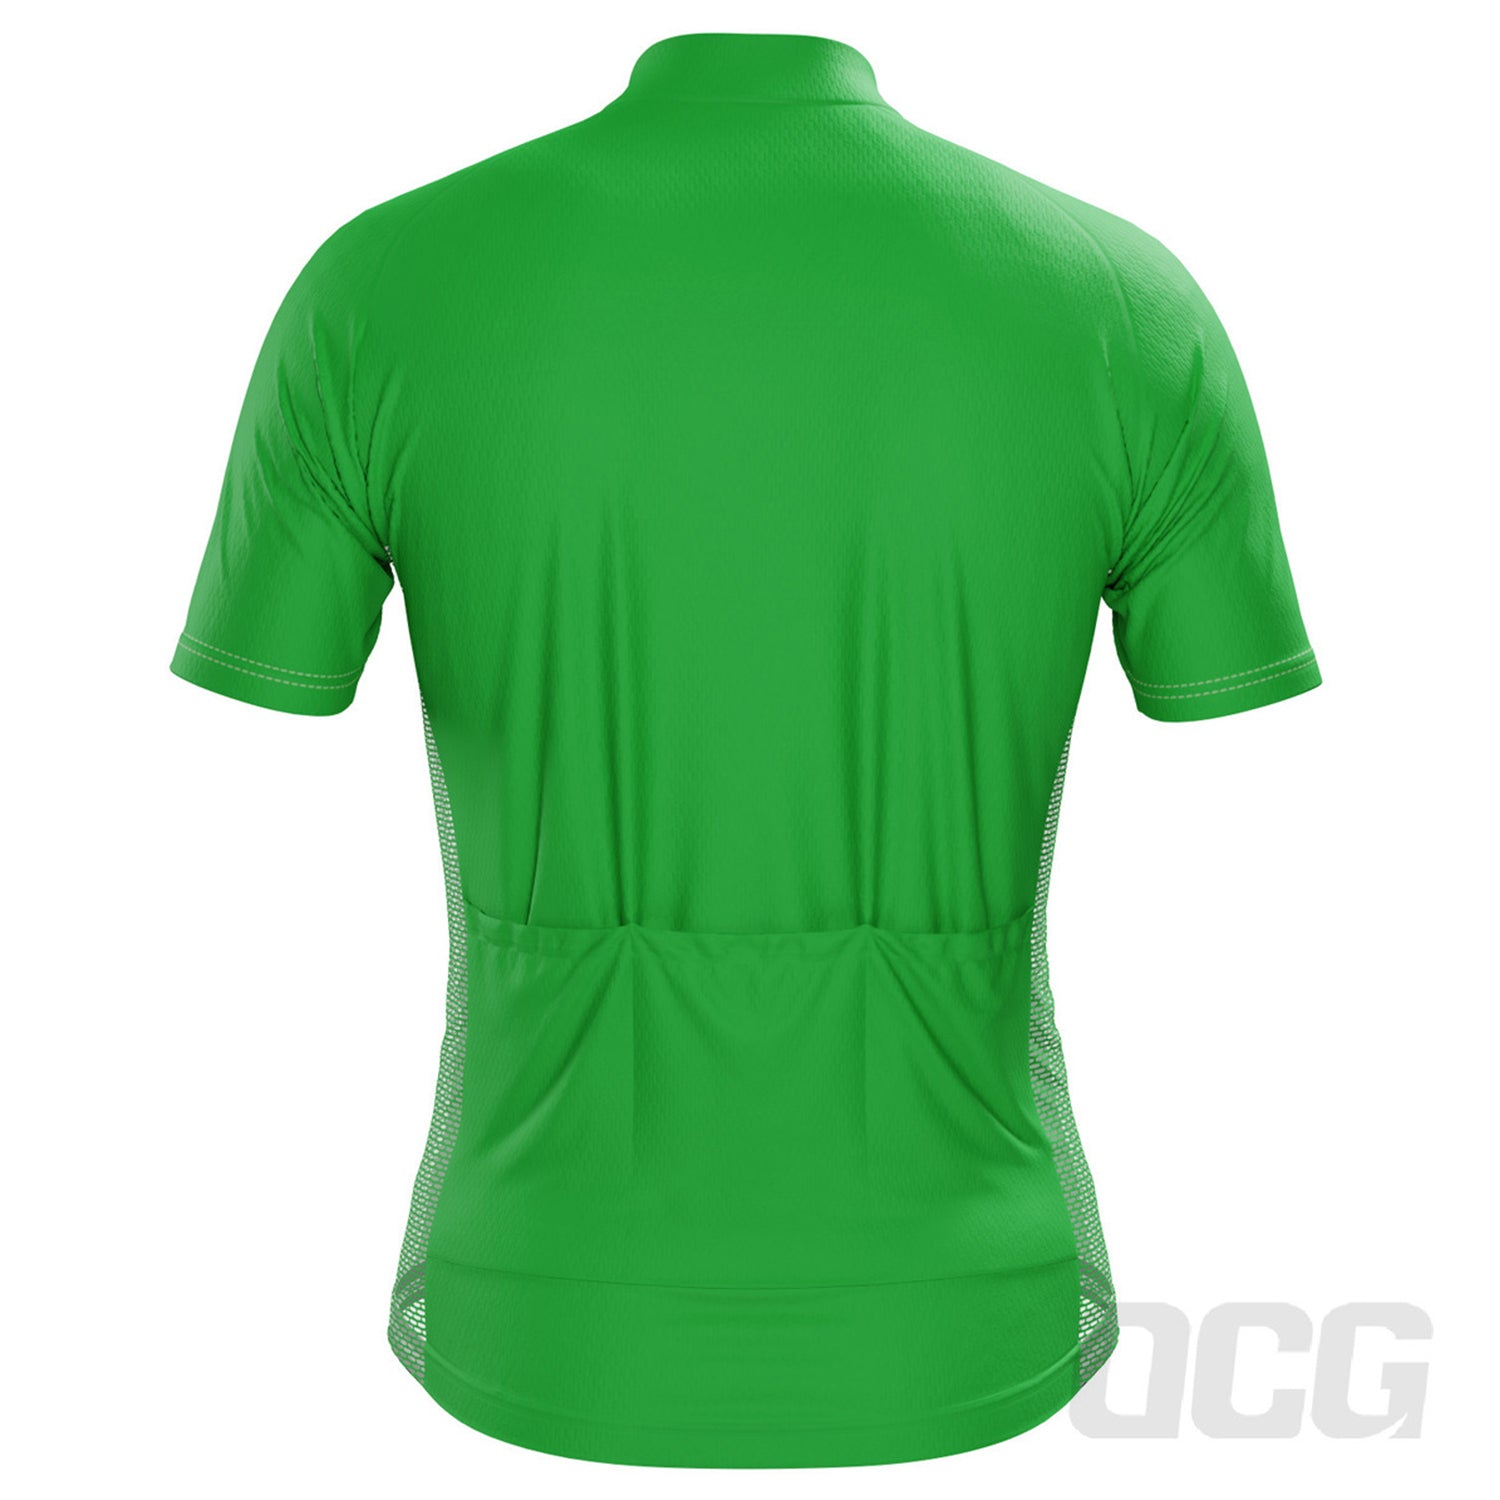 Men's Evolution of Man in Green Short Sleeve Cycling Jersey